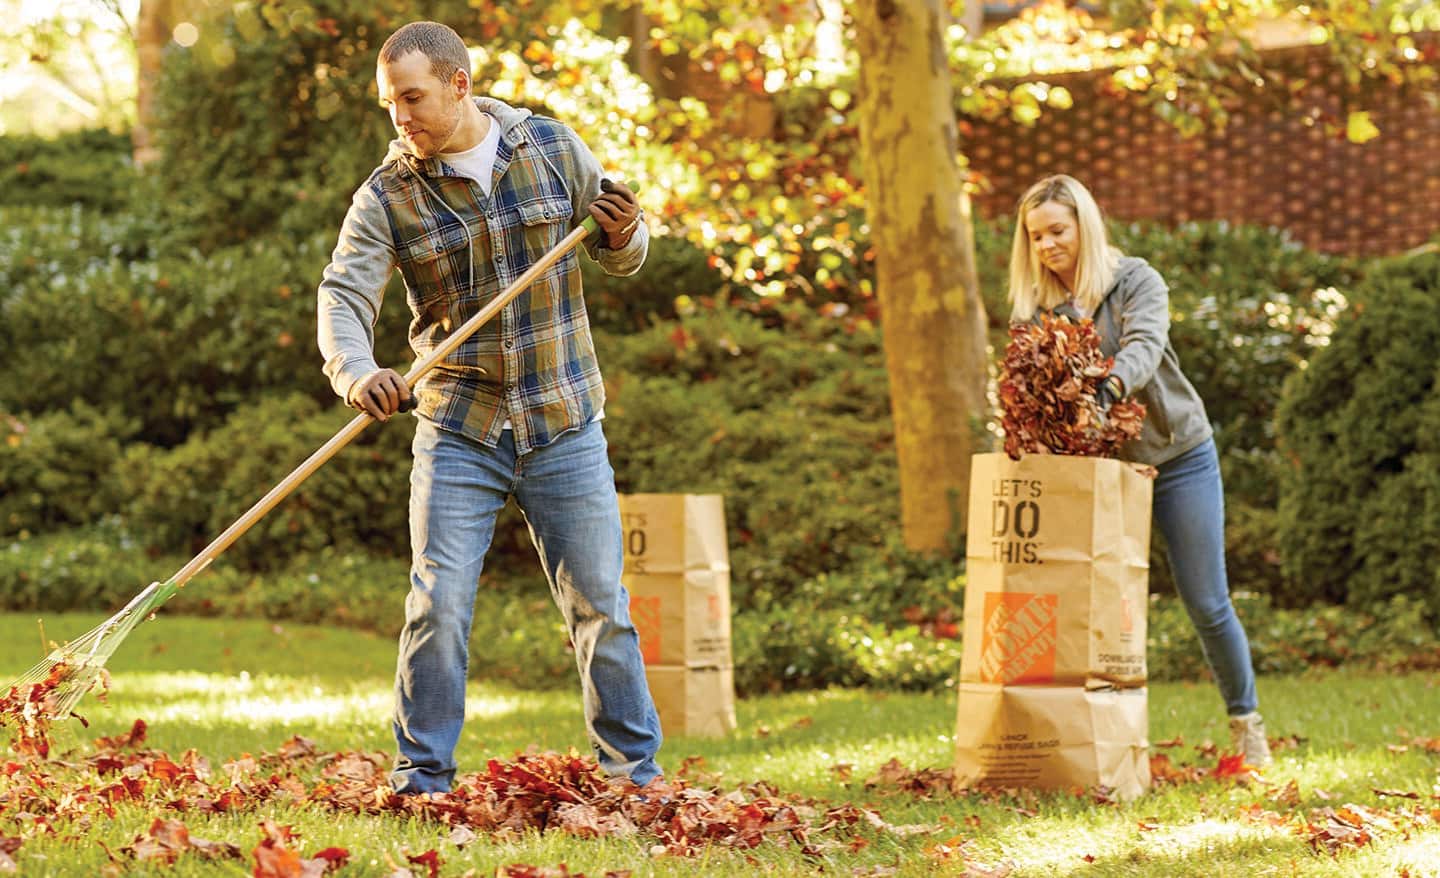 Two people rake leaves and place them in brown paper leaf bags